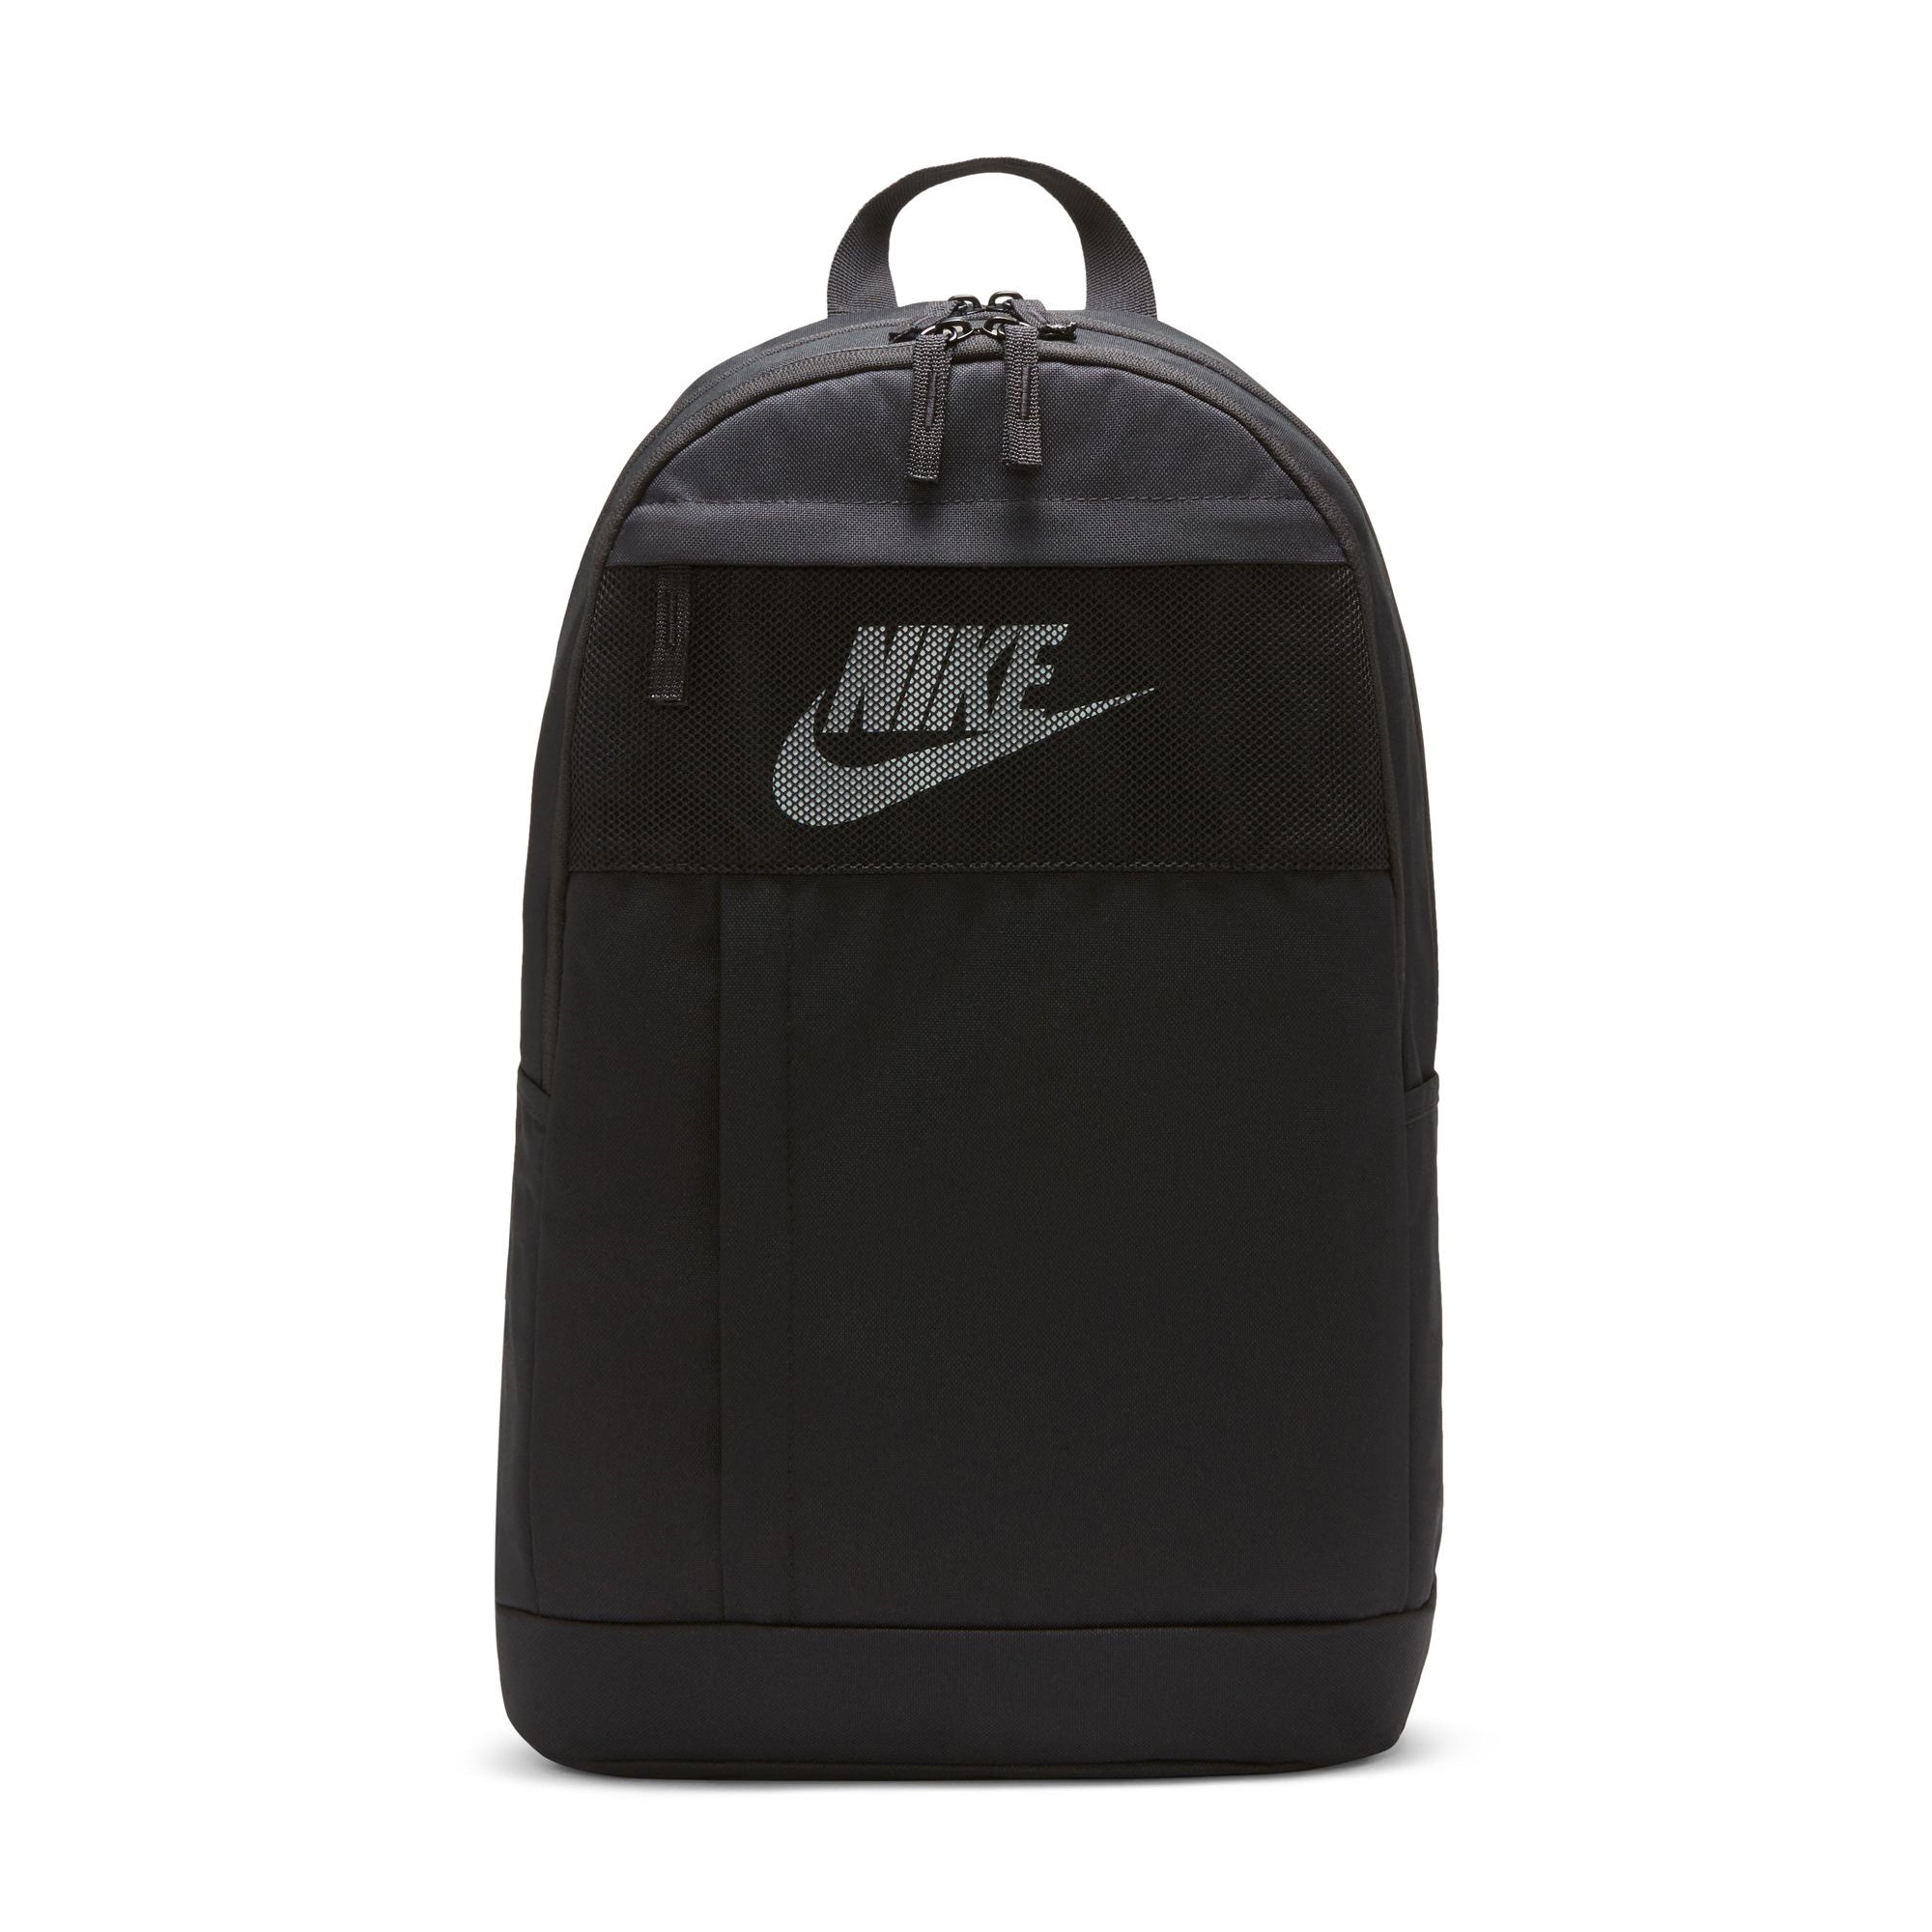 Black Nike back pack with two main pockets with zips, mesh pocket on front and white nike swoosh logo on front. Free uk shipping over £50